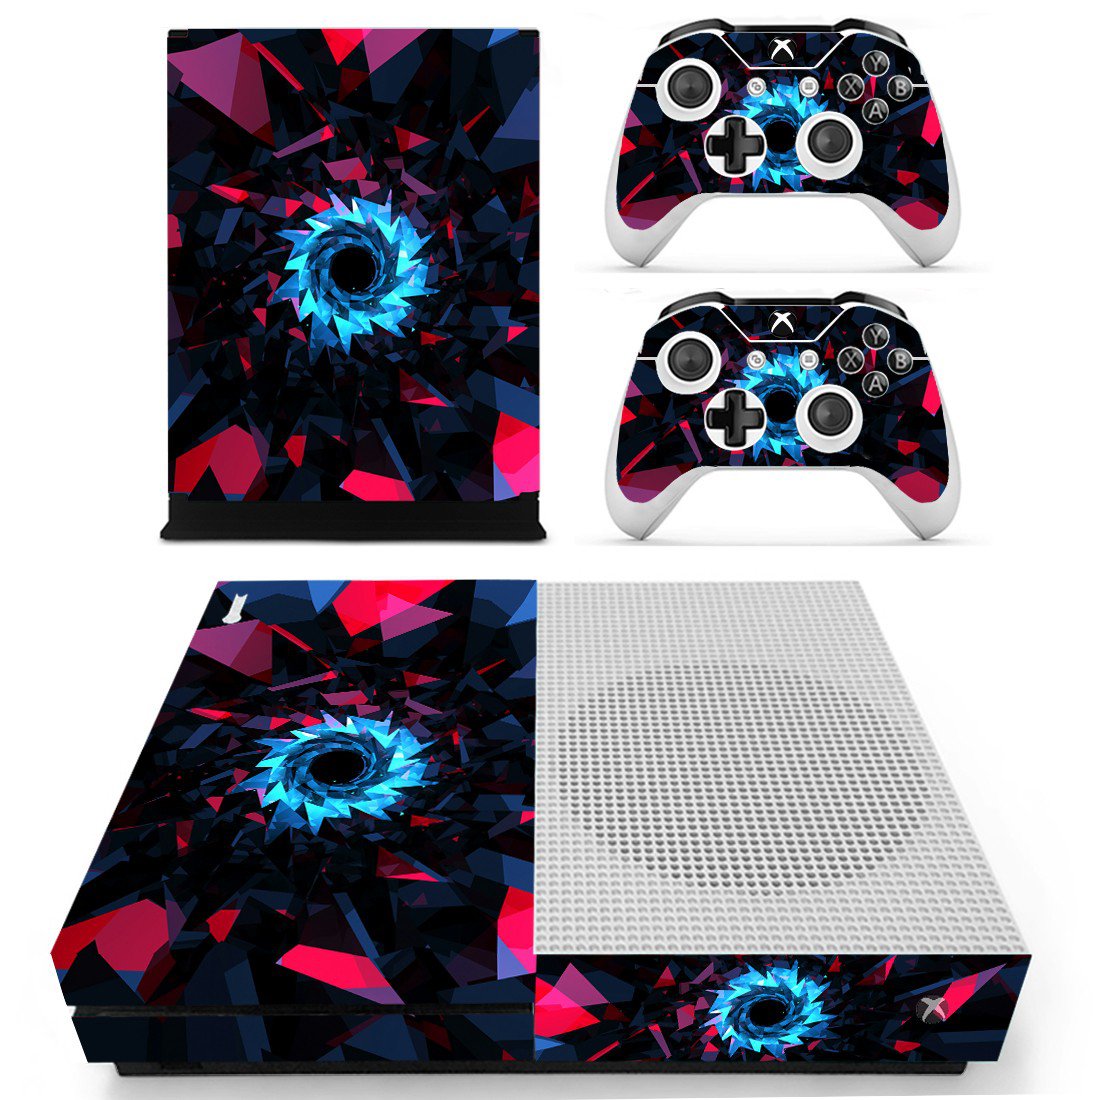 Xbox One S And Controllers Skin Sticker - Abstraction Design 6